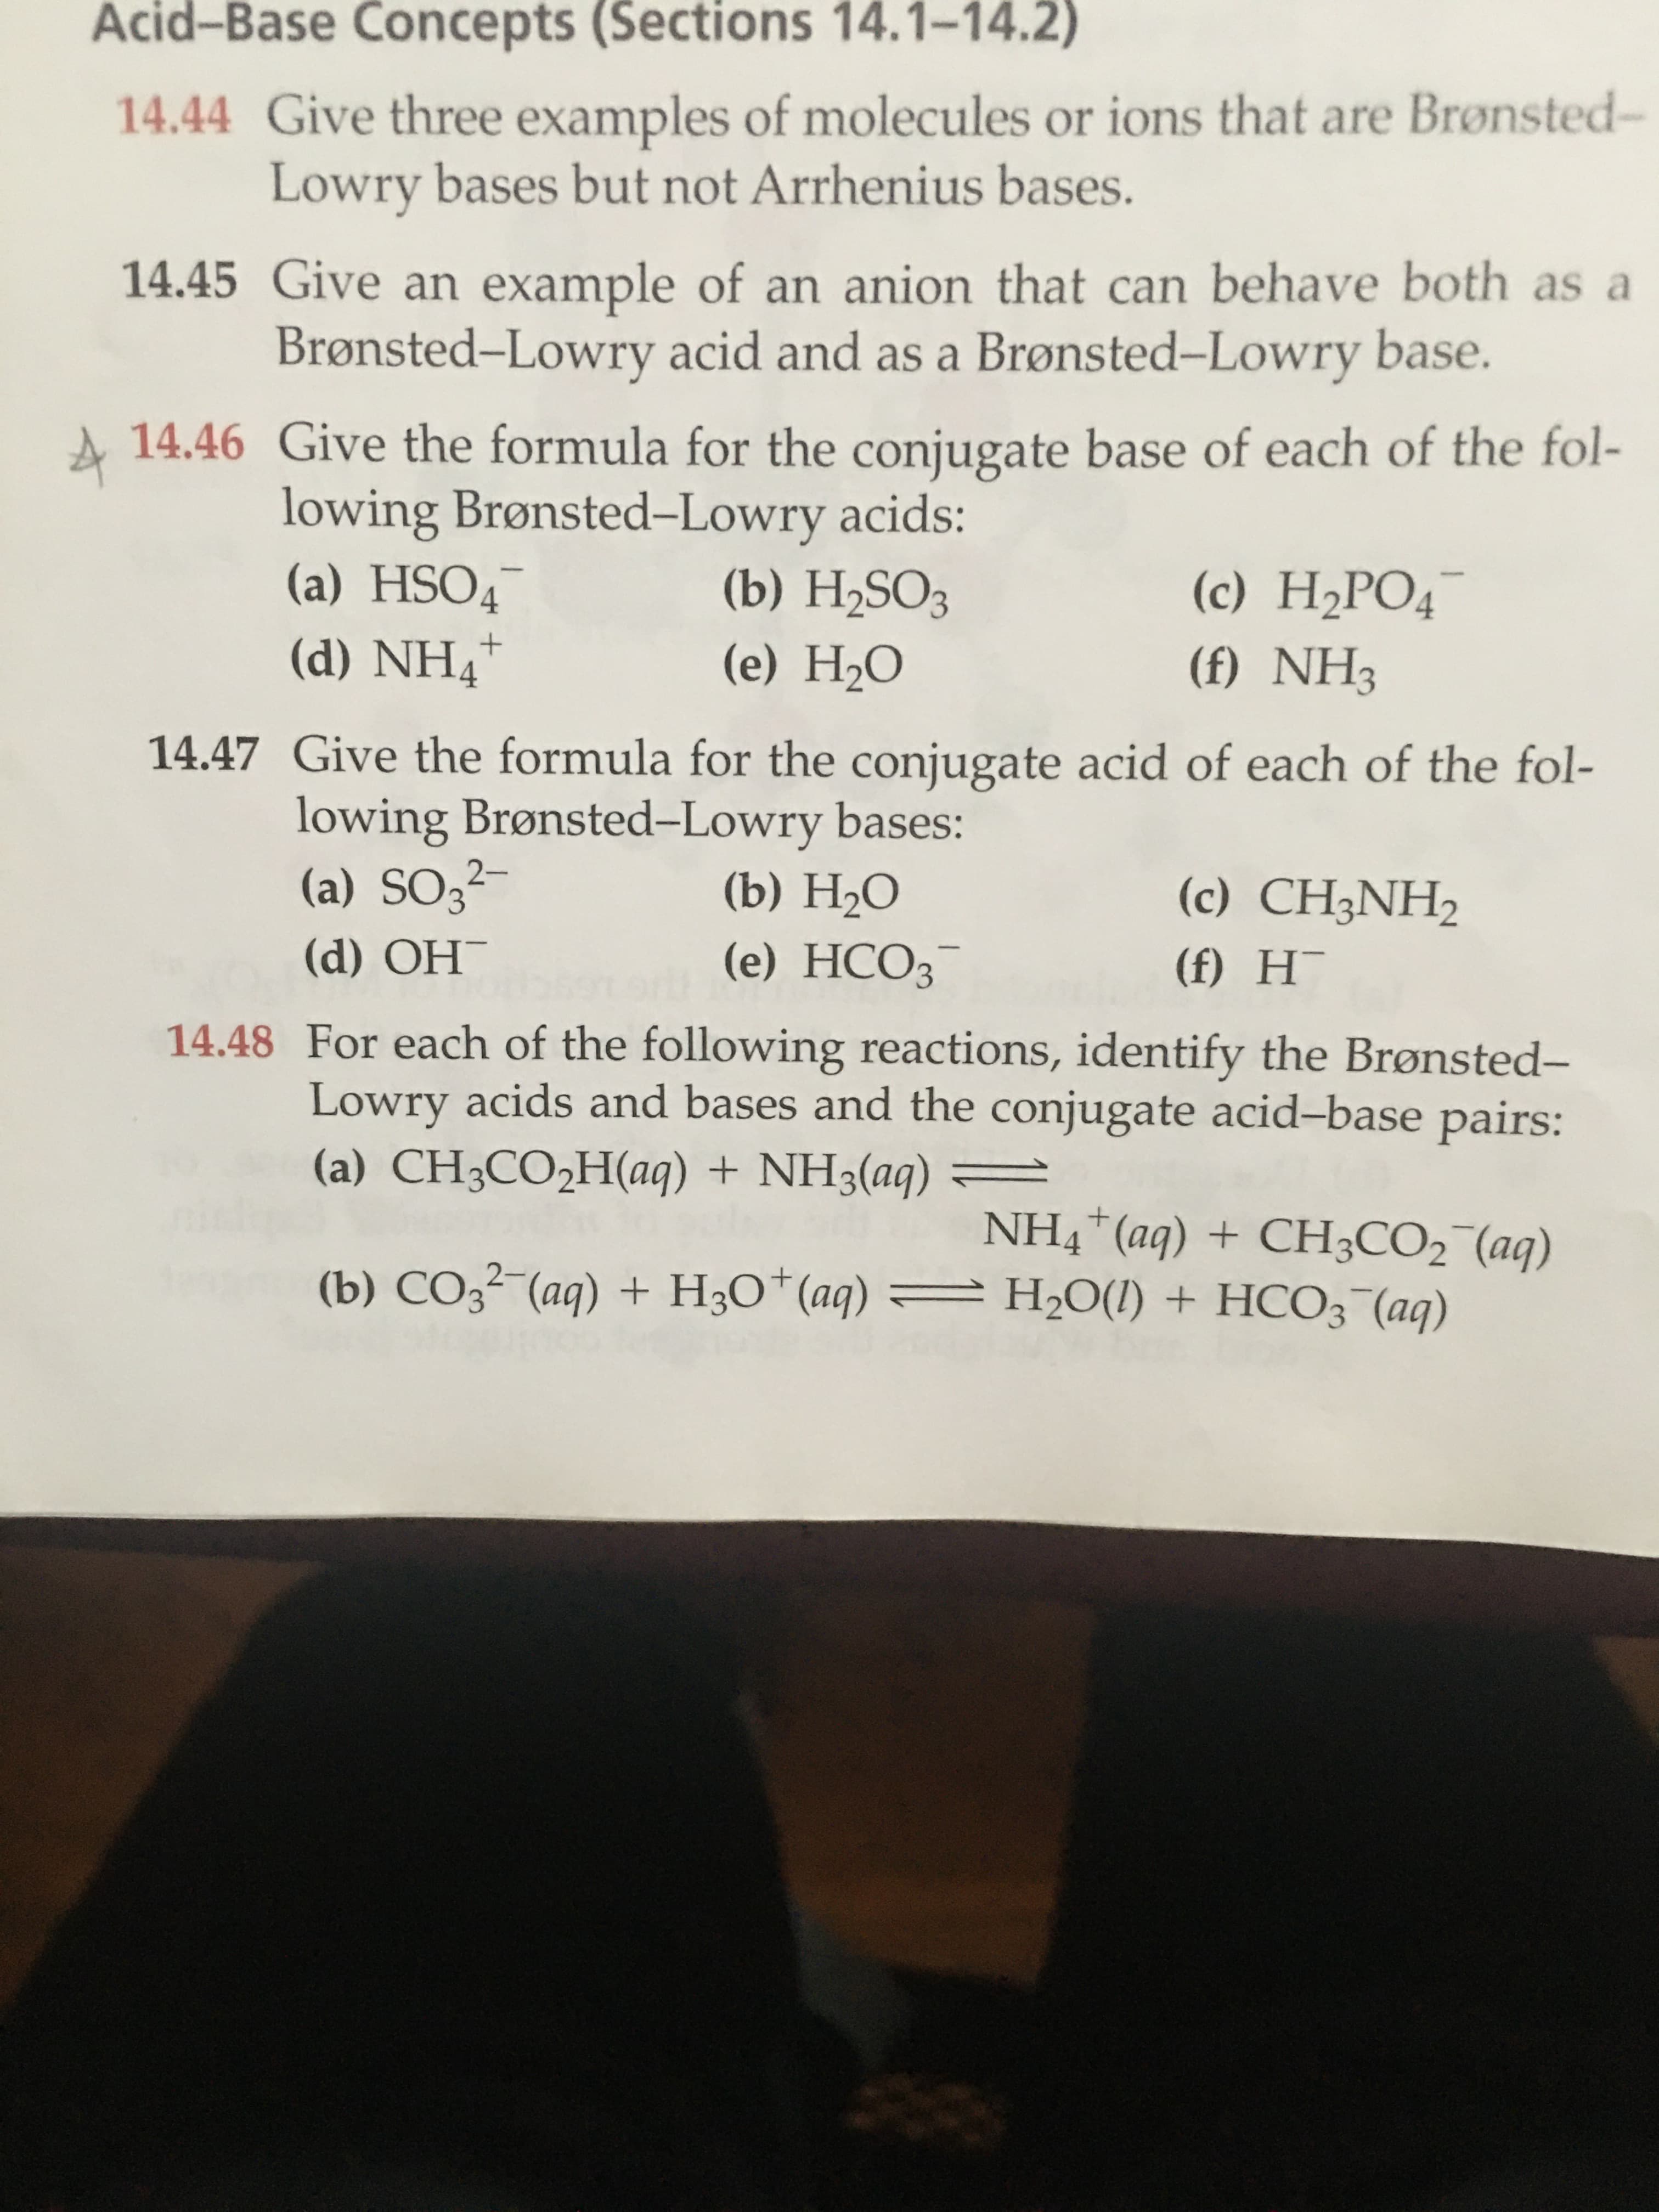 A 14.46 Give the formula for the conjugate base of each of the fol-
lowing Brønsted-Lowry acids:
(a) HSO4
(d) NH4"
(b) H2SO3
(c) H2PO4¯
-
(e) H2O
(f) NH3
